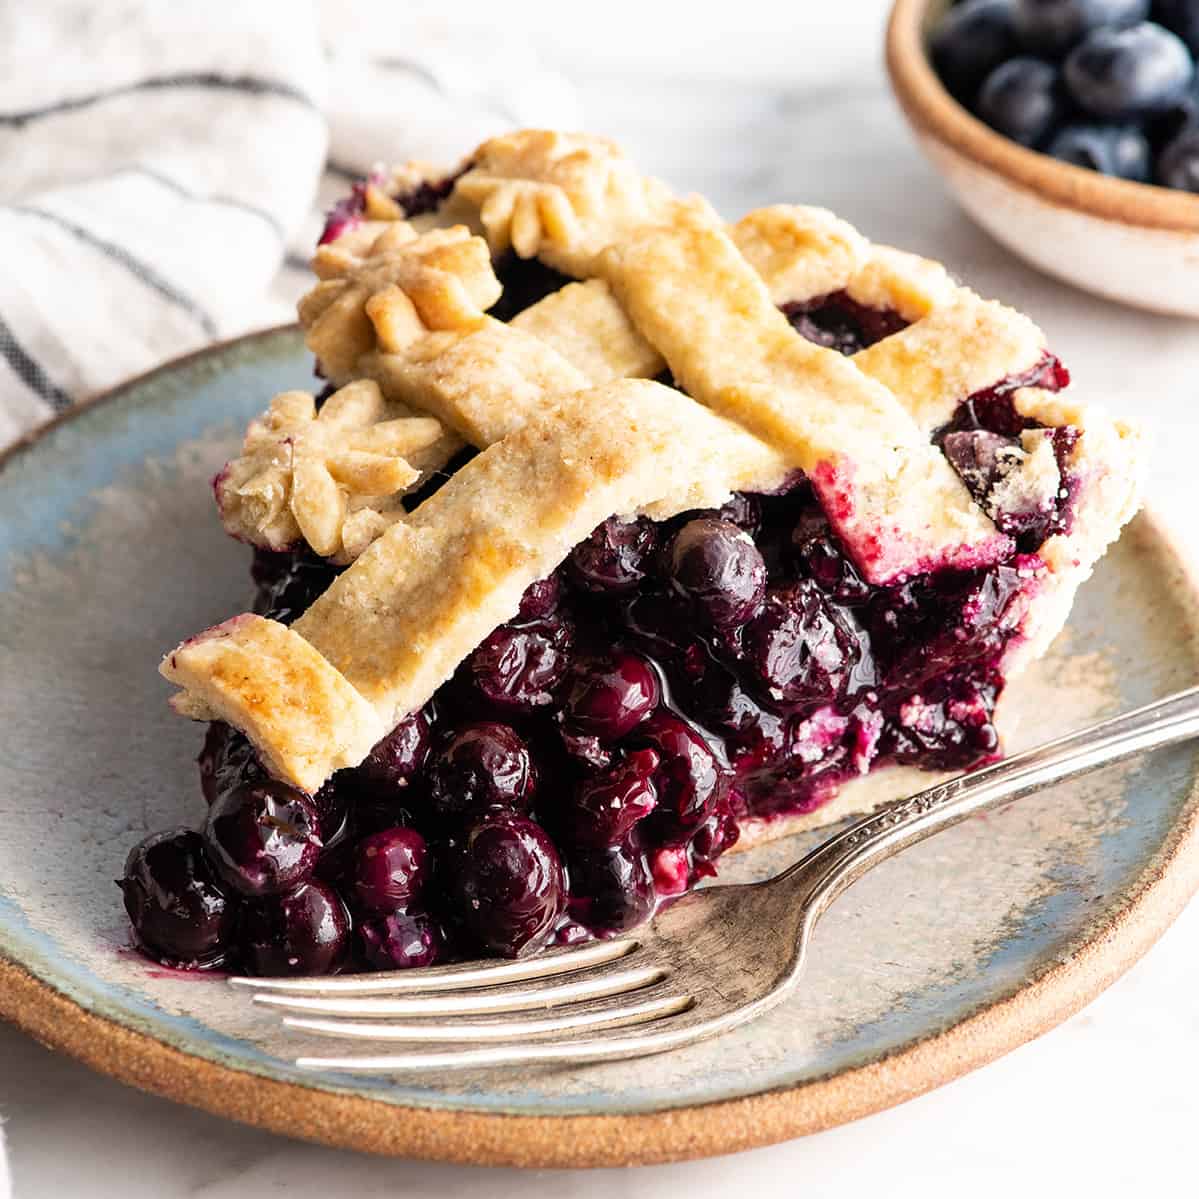 front view of a slice of blueberry pie on a plate